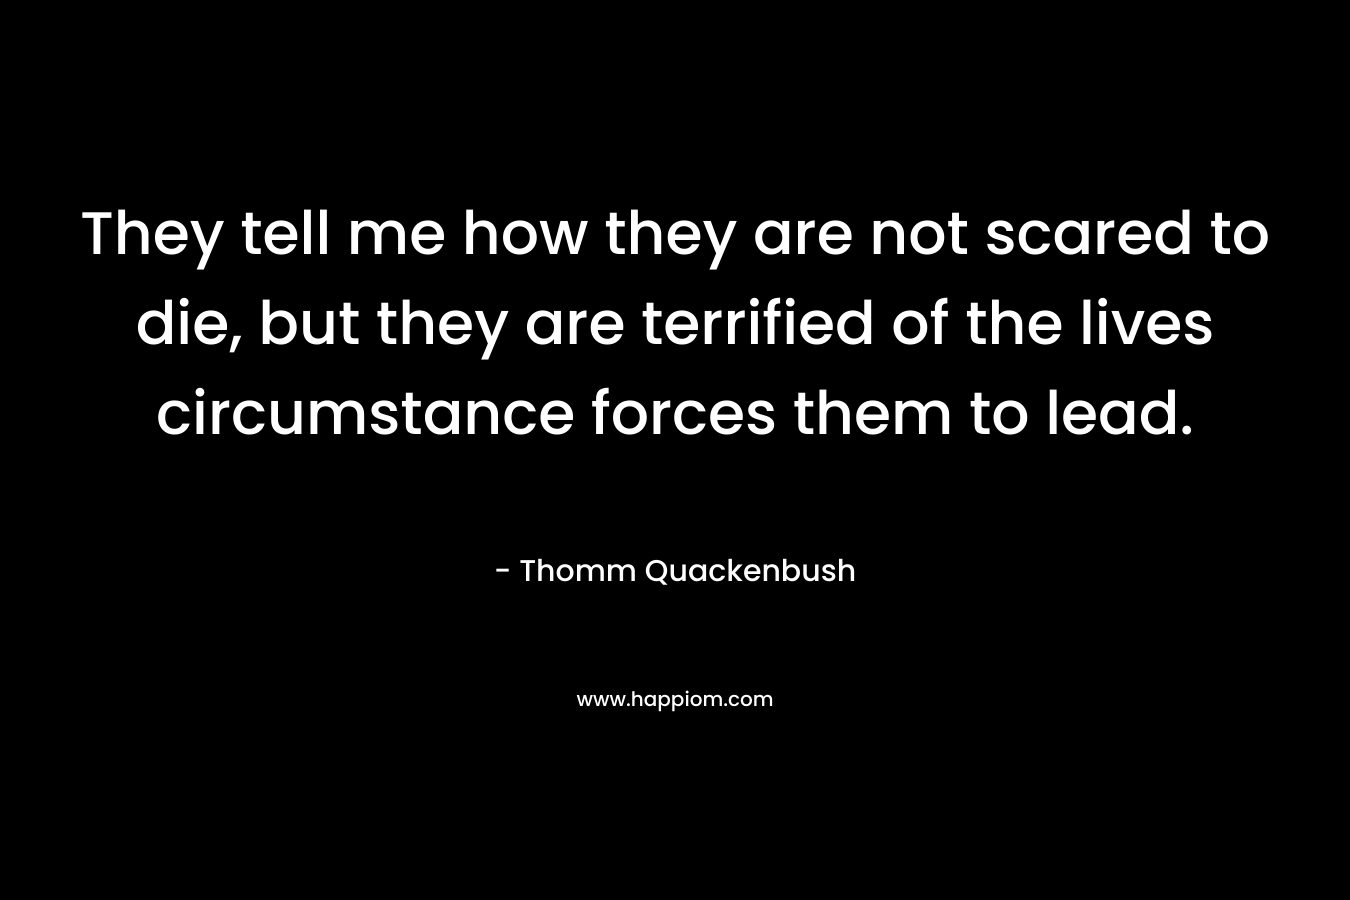 They tell me how they are not scared to die, but they are terrified of the lives circumstance forces them to lead.